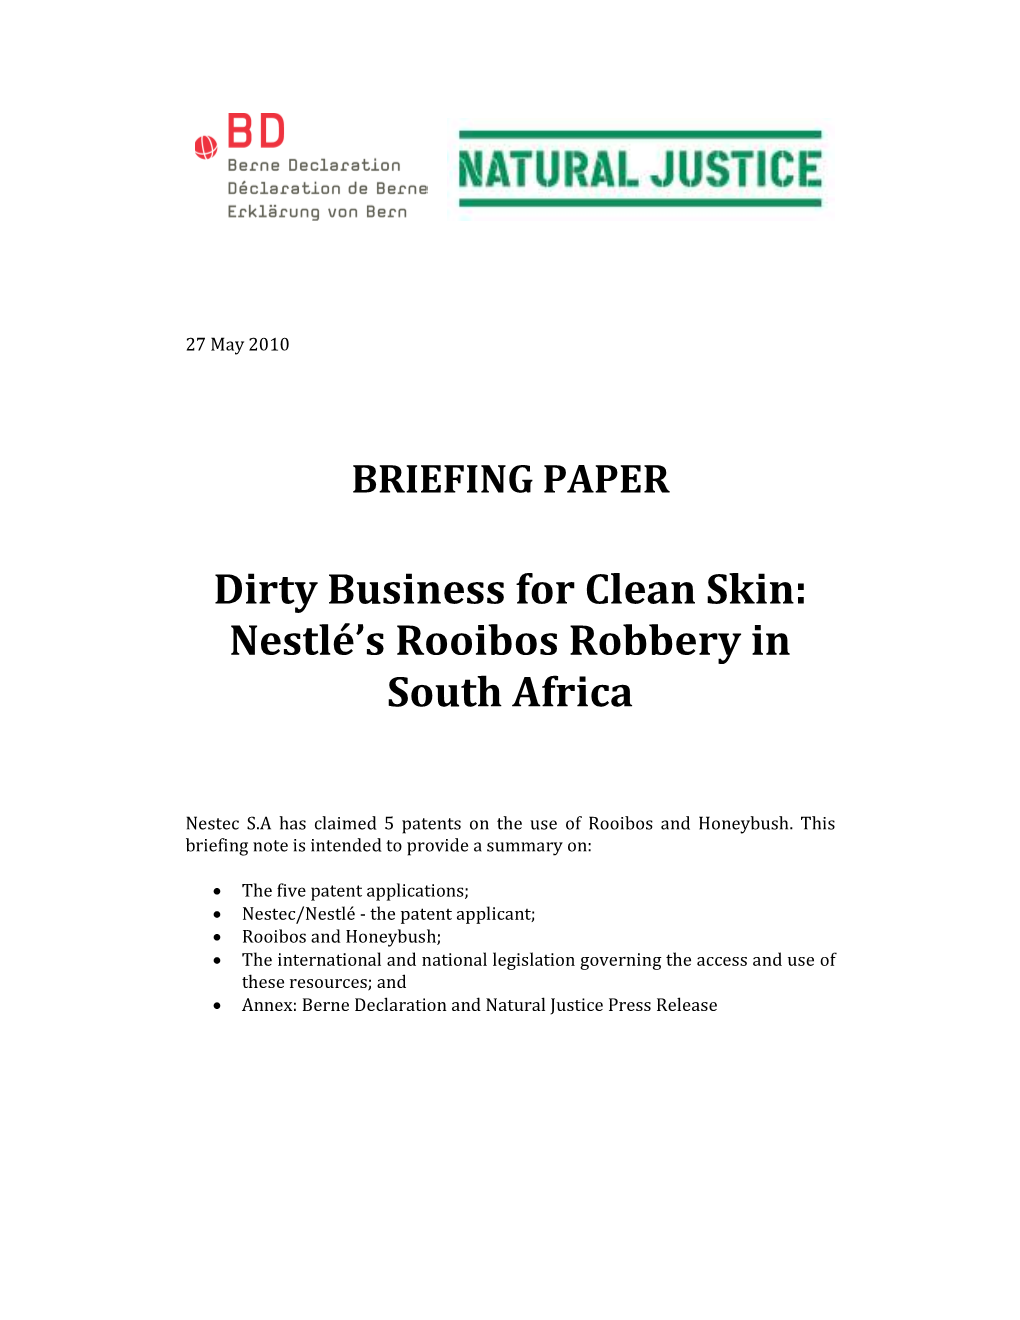 Nestlé's Rooibos Robbery in South Africa